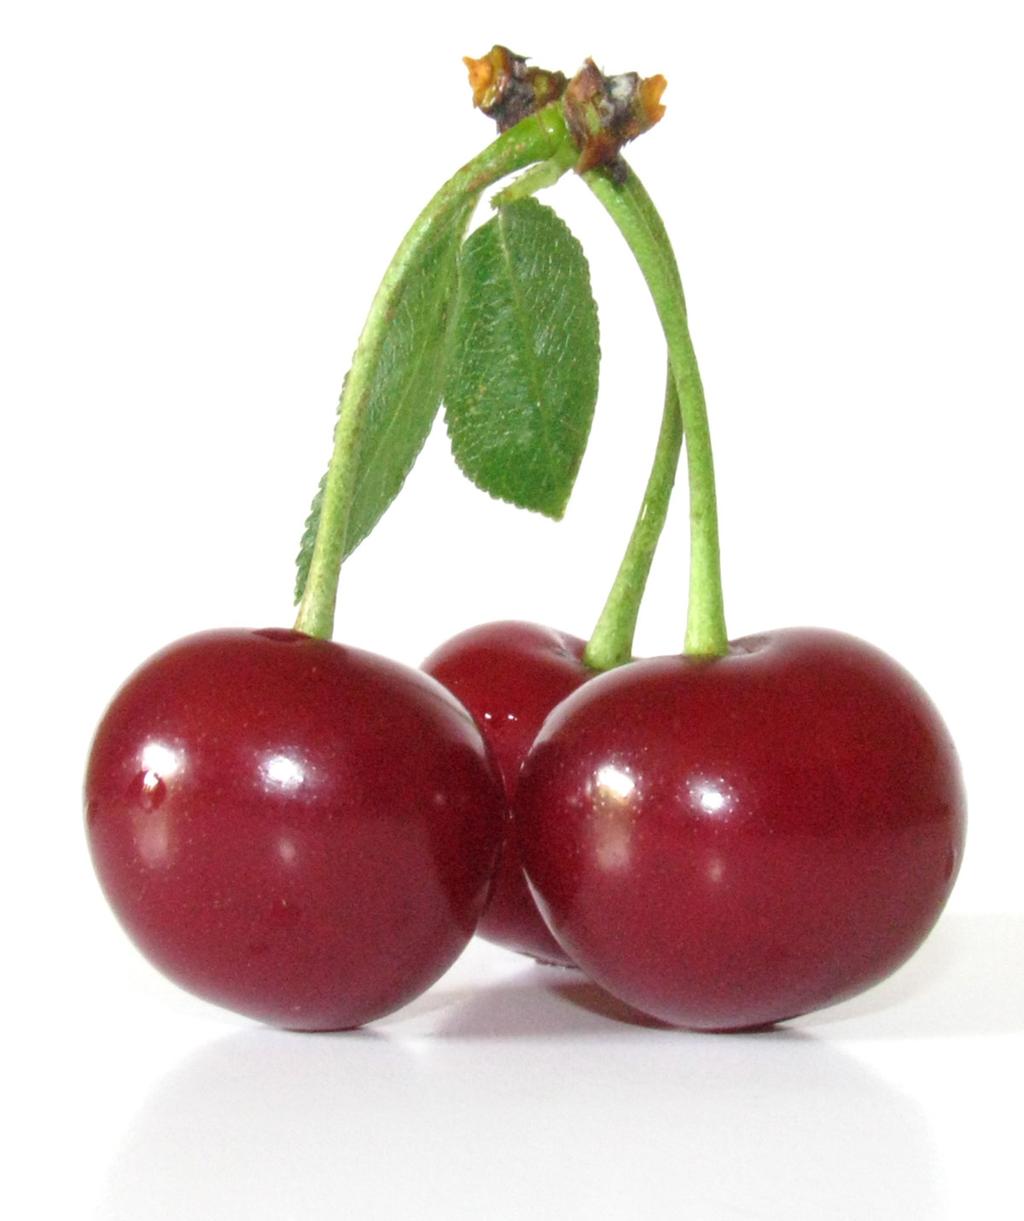 Tart Cherry Benefits The number of farms producing tart cherries is relatively stable, changing little over the past decade.